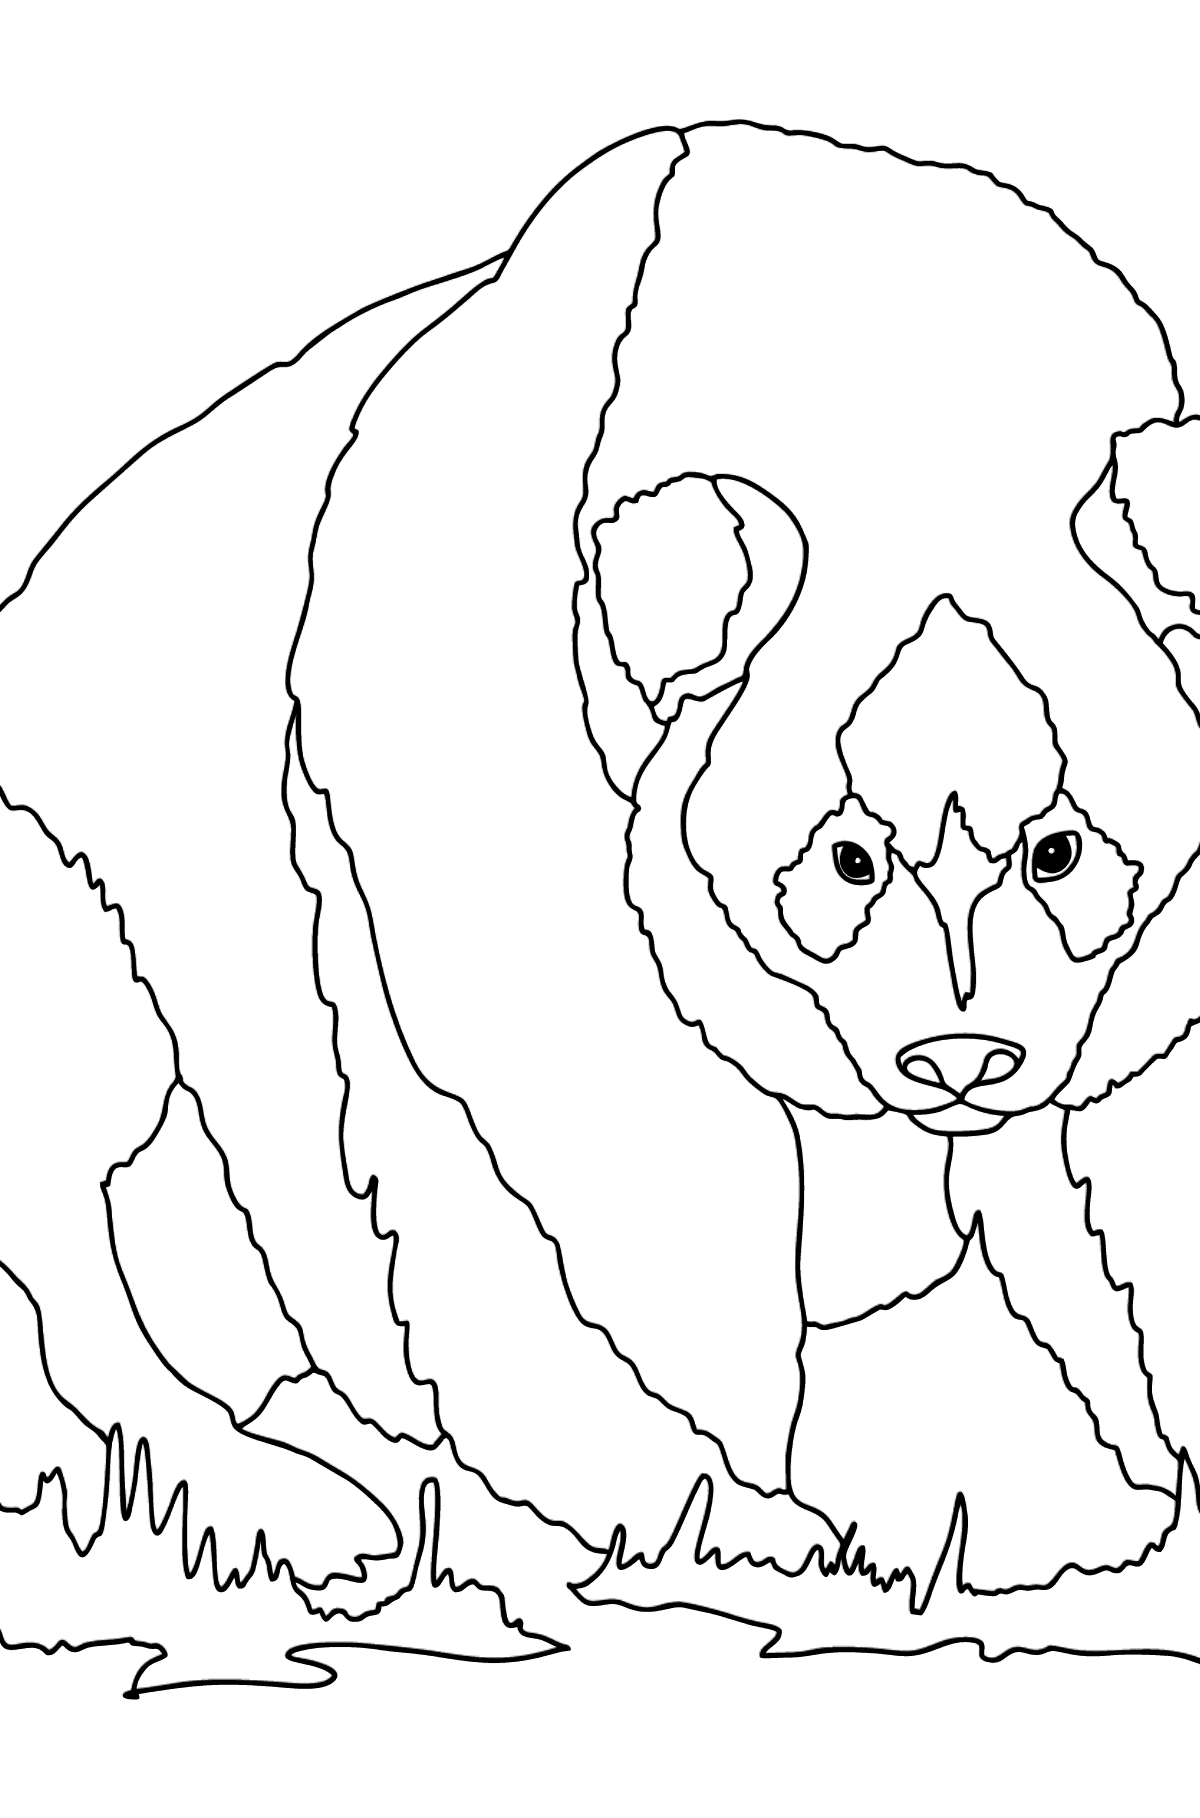 Coloring Page - A Panda is on a Hunt - Coloring Pages for Kids